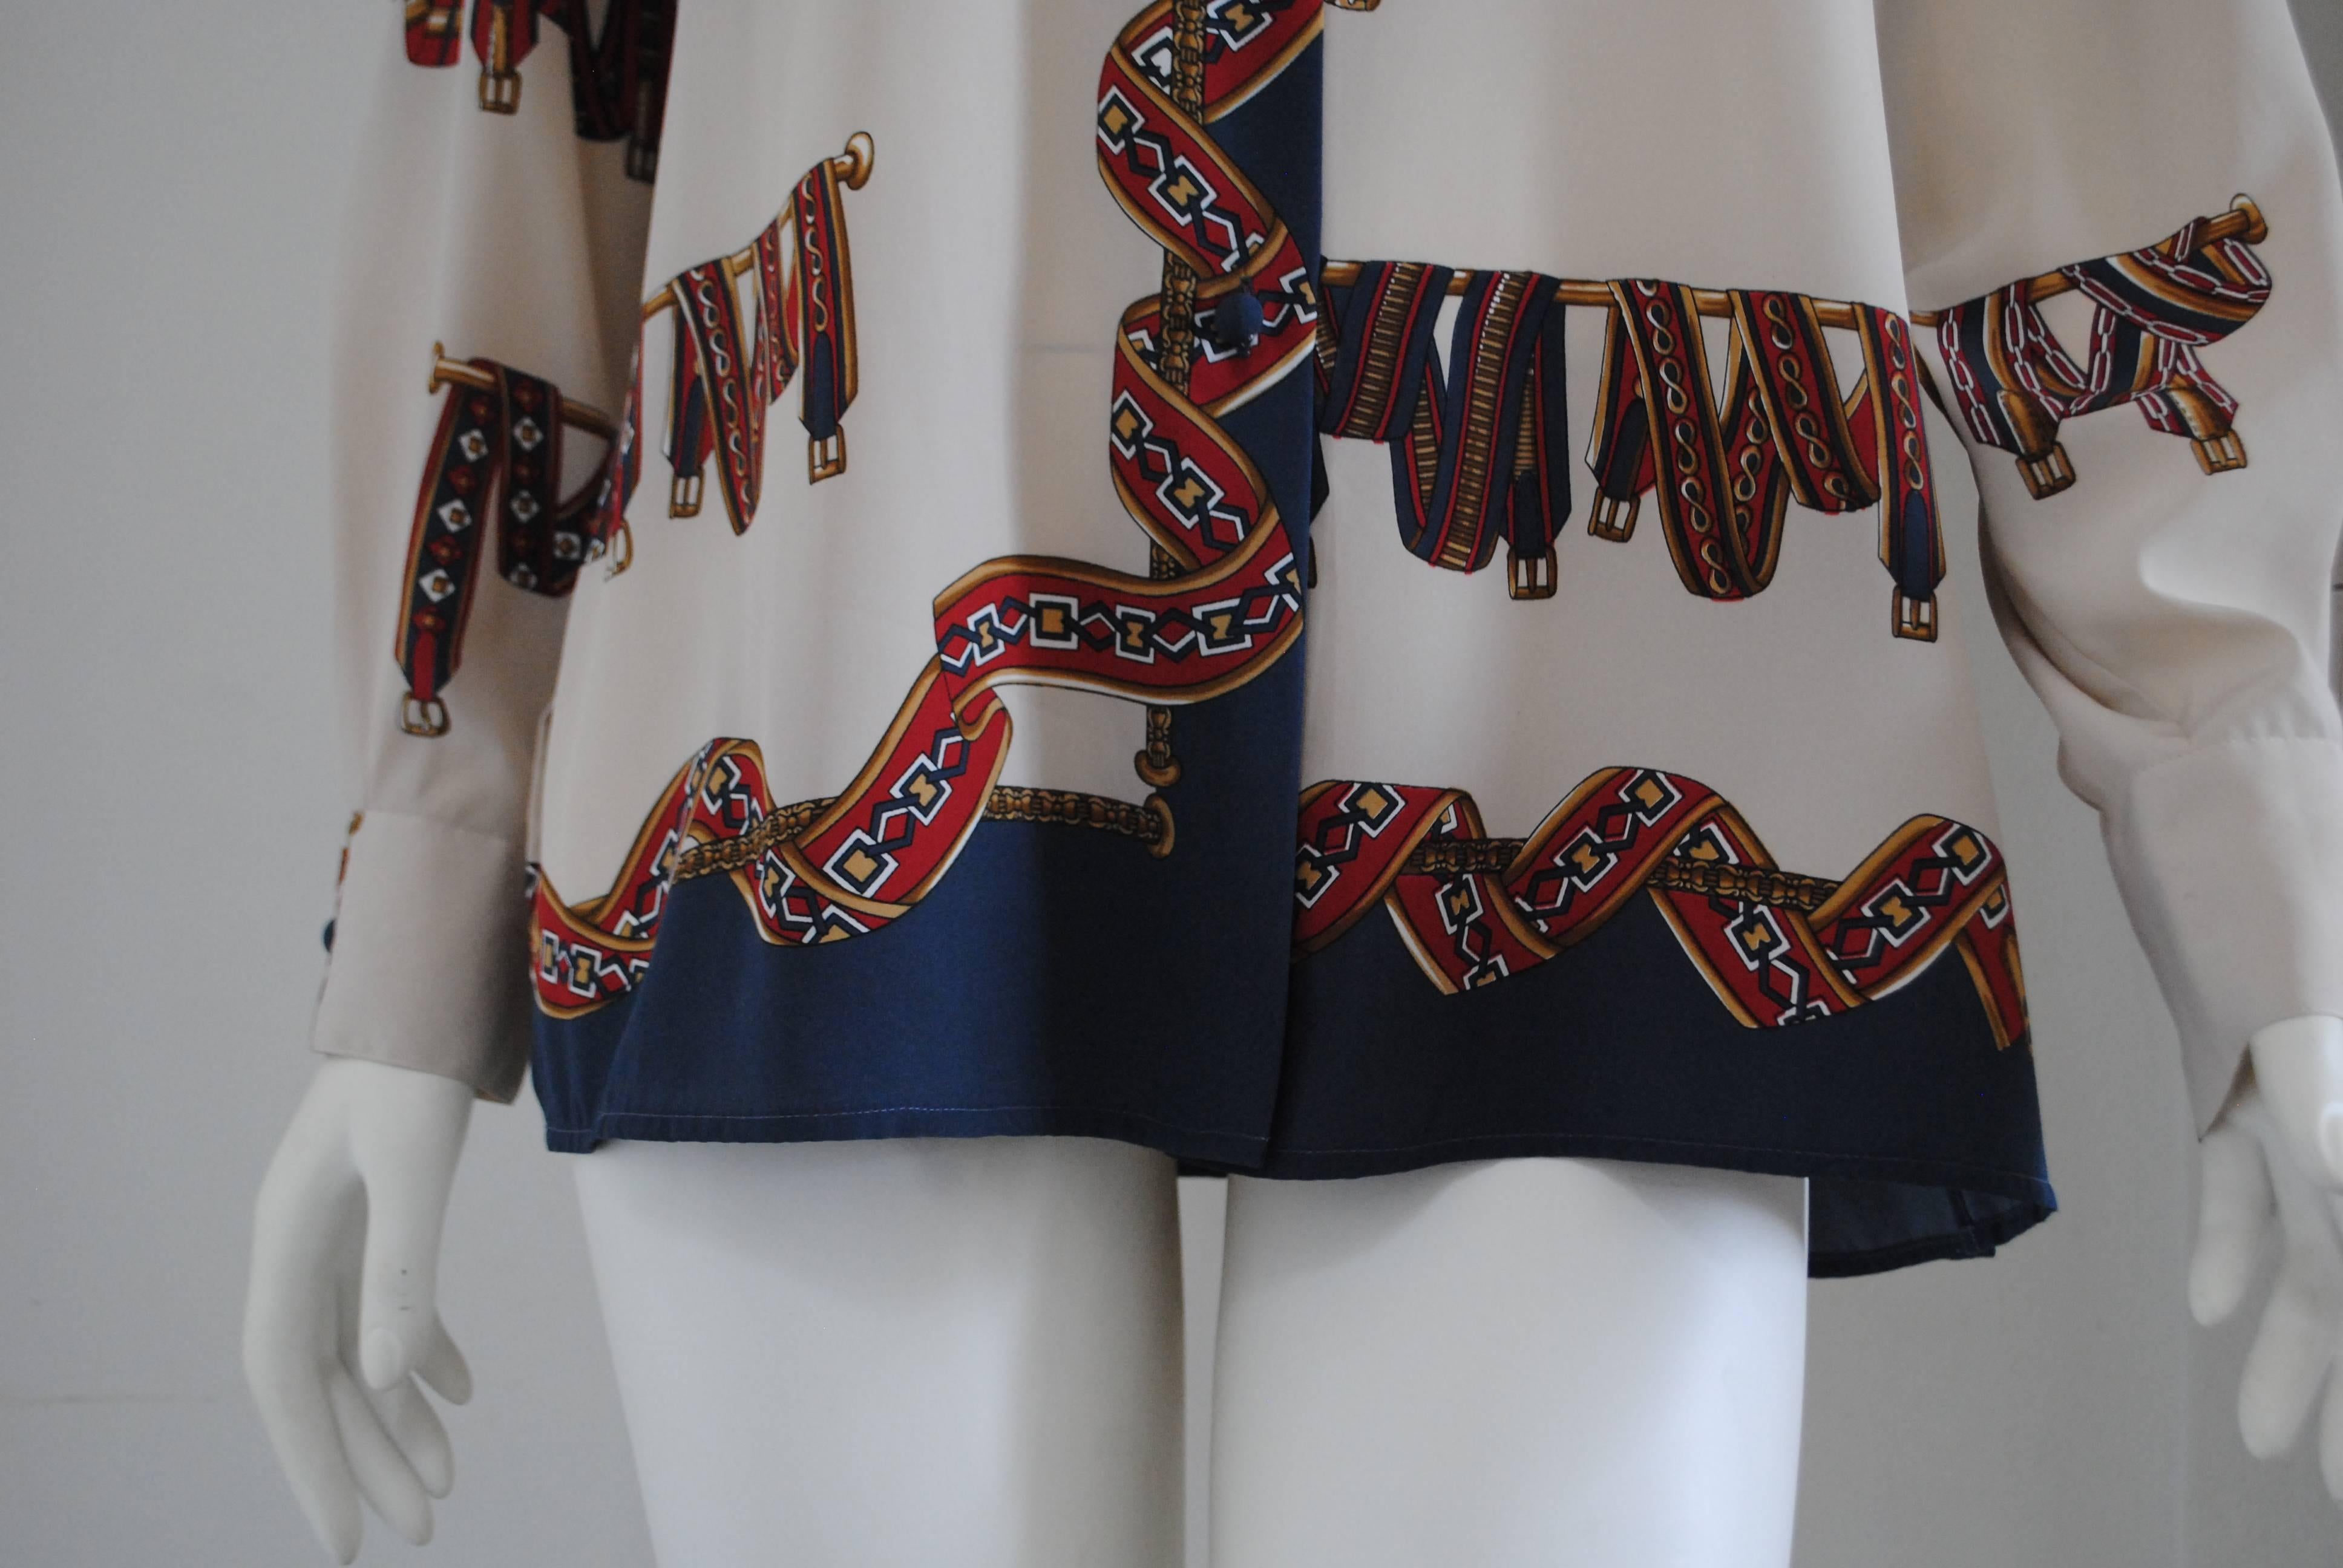 1980s Luca Giordani Cream Multicolour Belts Shirt

Totaly made in italy in italian size range 44

Composition: Polyestere